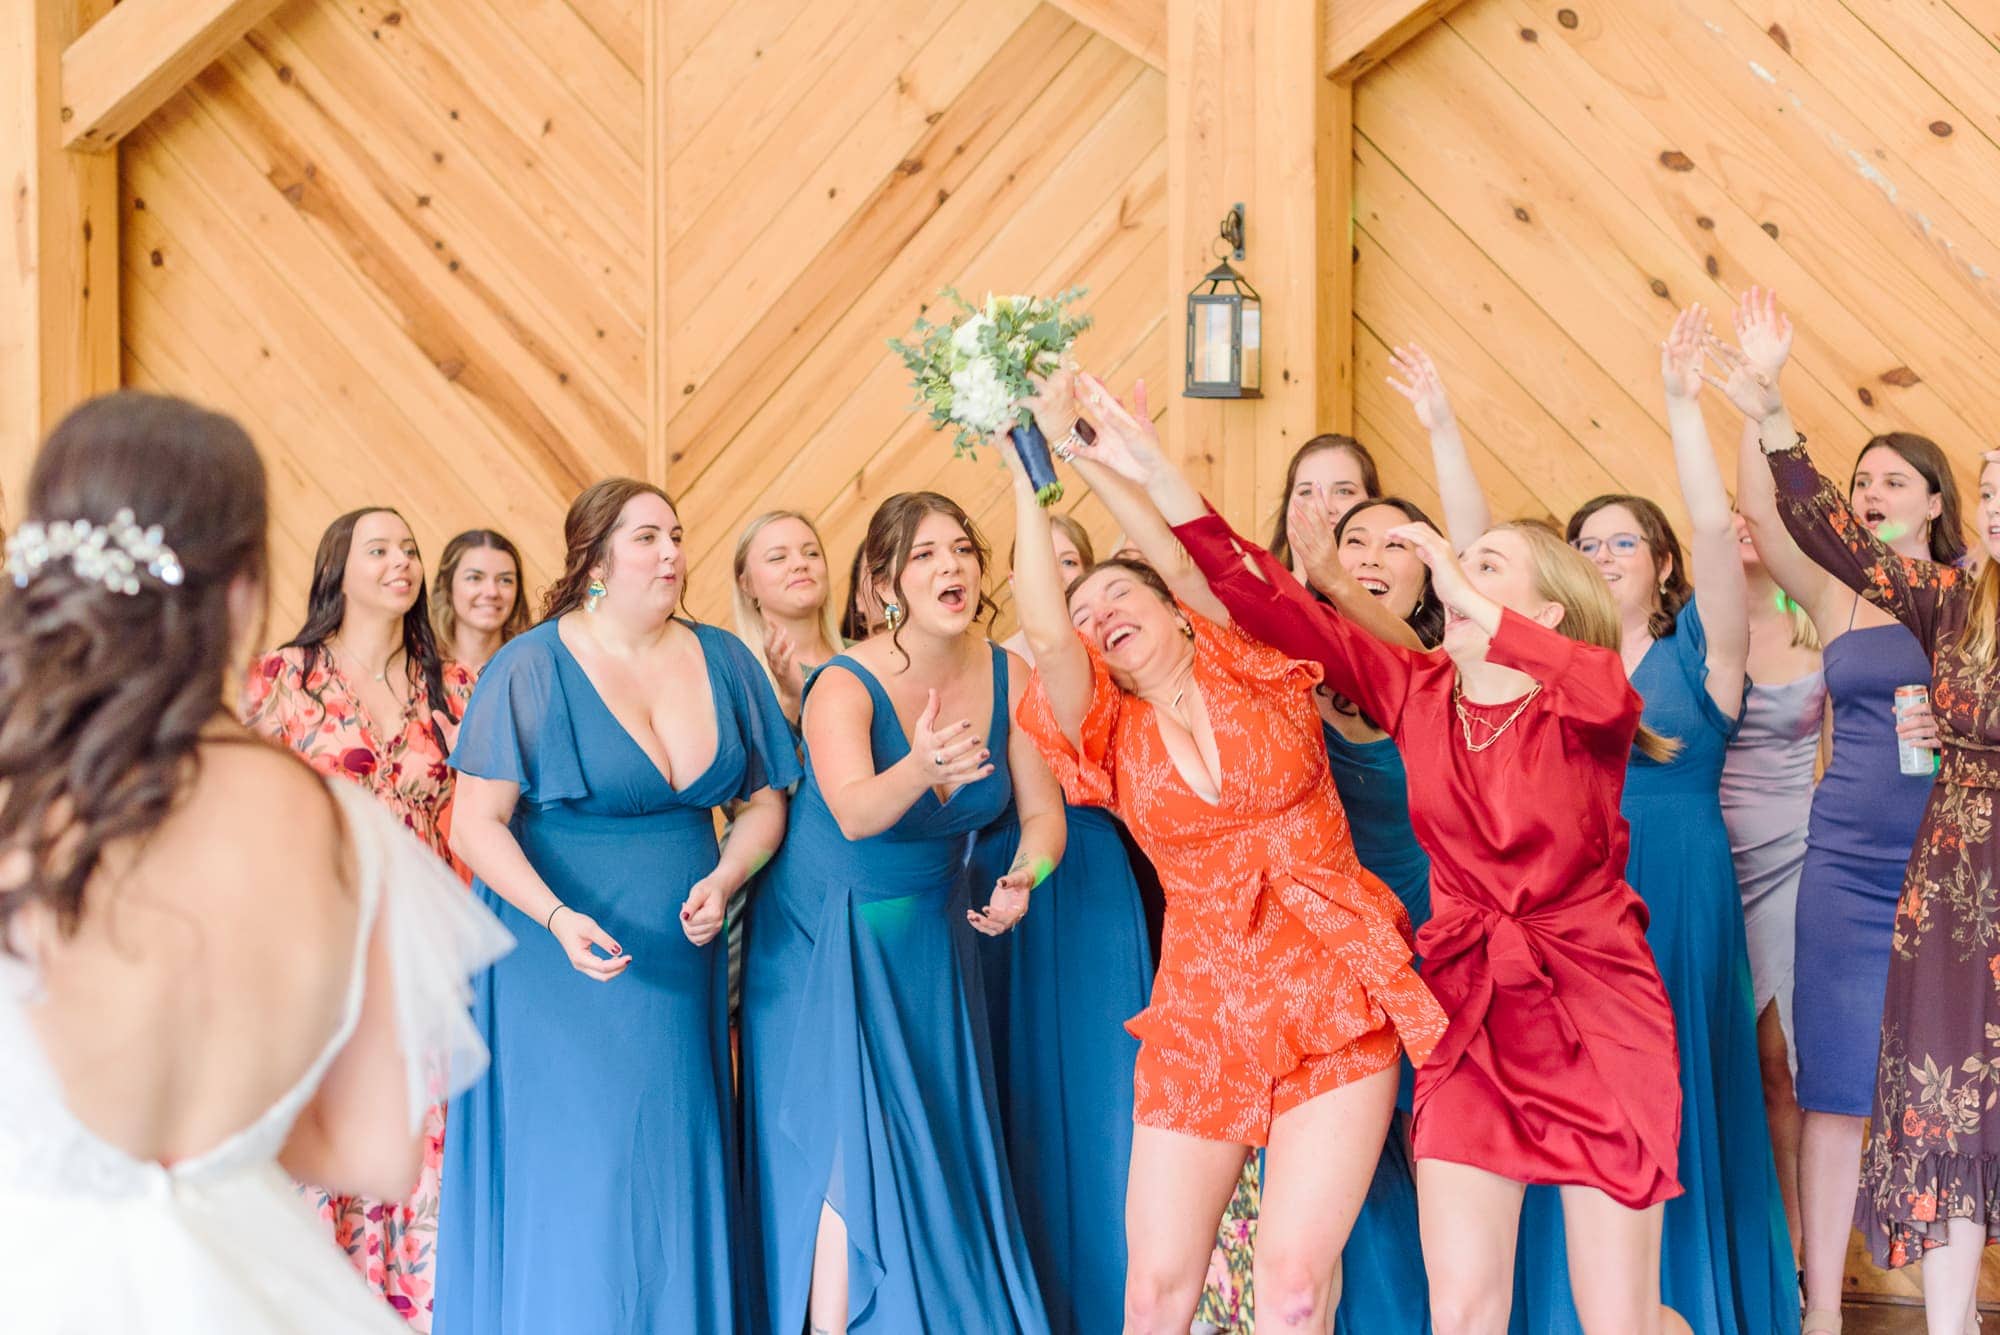 The single ladies jump for a chance to catch Natalie's bouquet inside the Alexander Homestead reception barn.